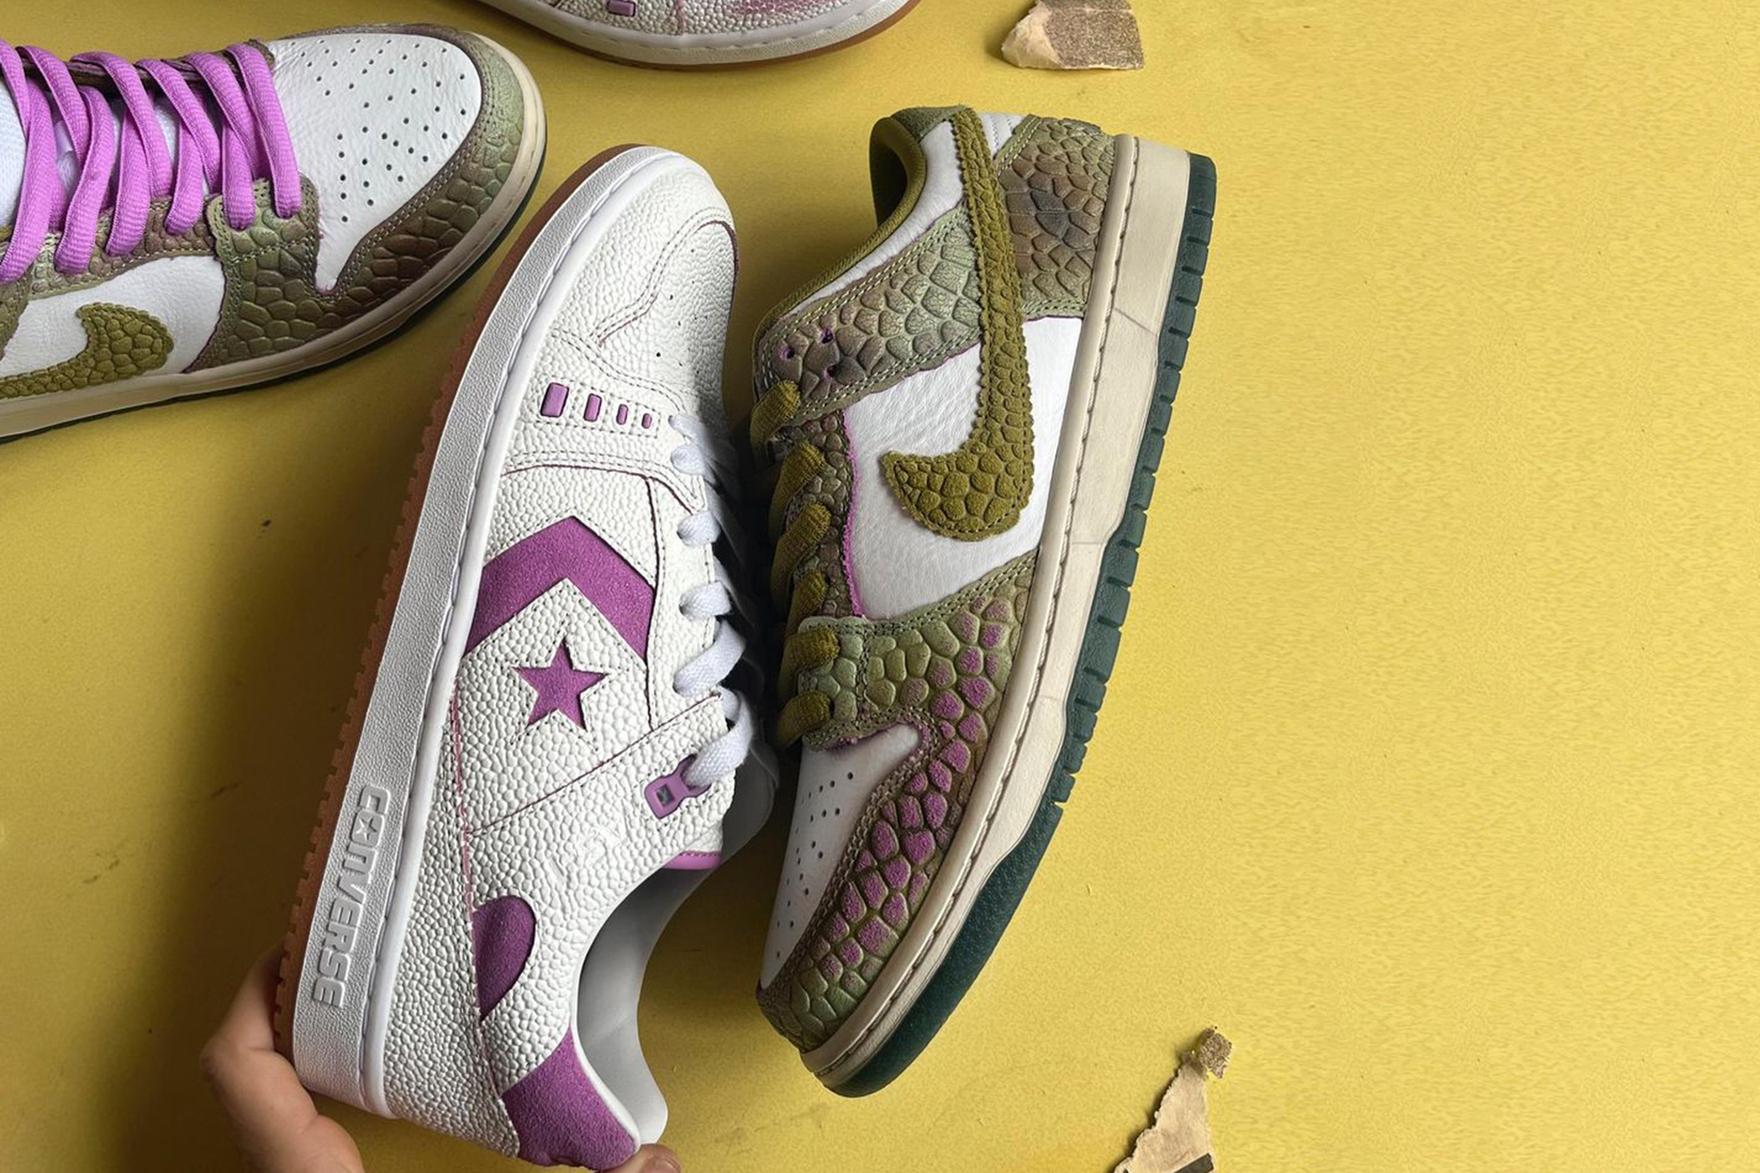 Alexis Sablone Nike Dunk SB colab and Converse AS-1 Pro